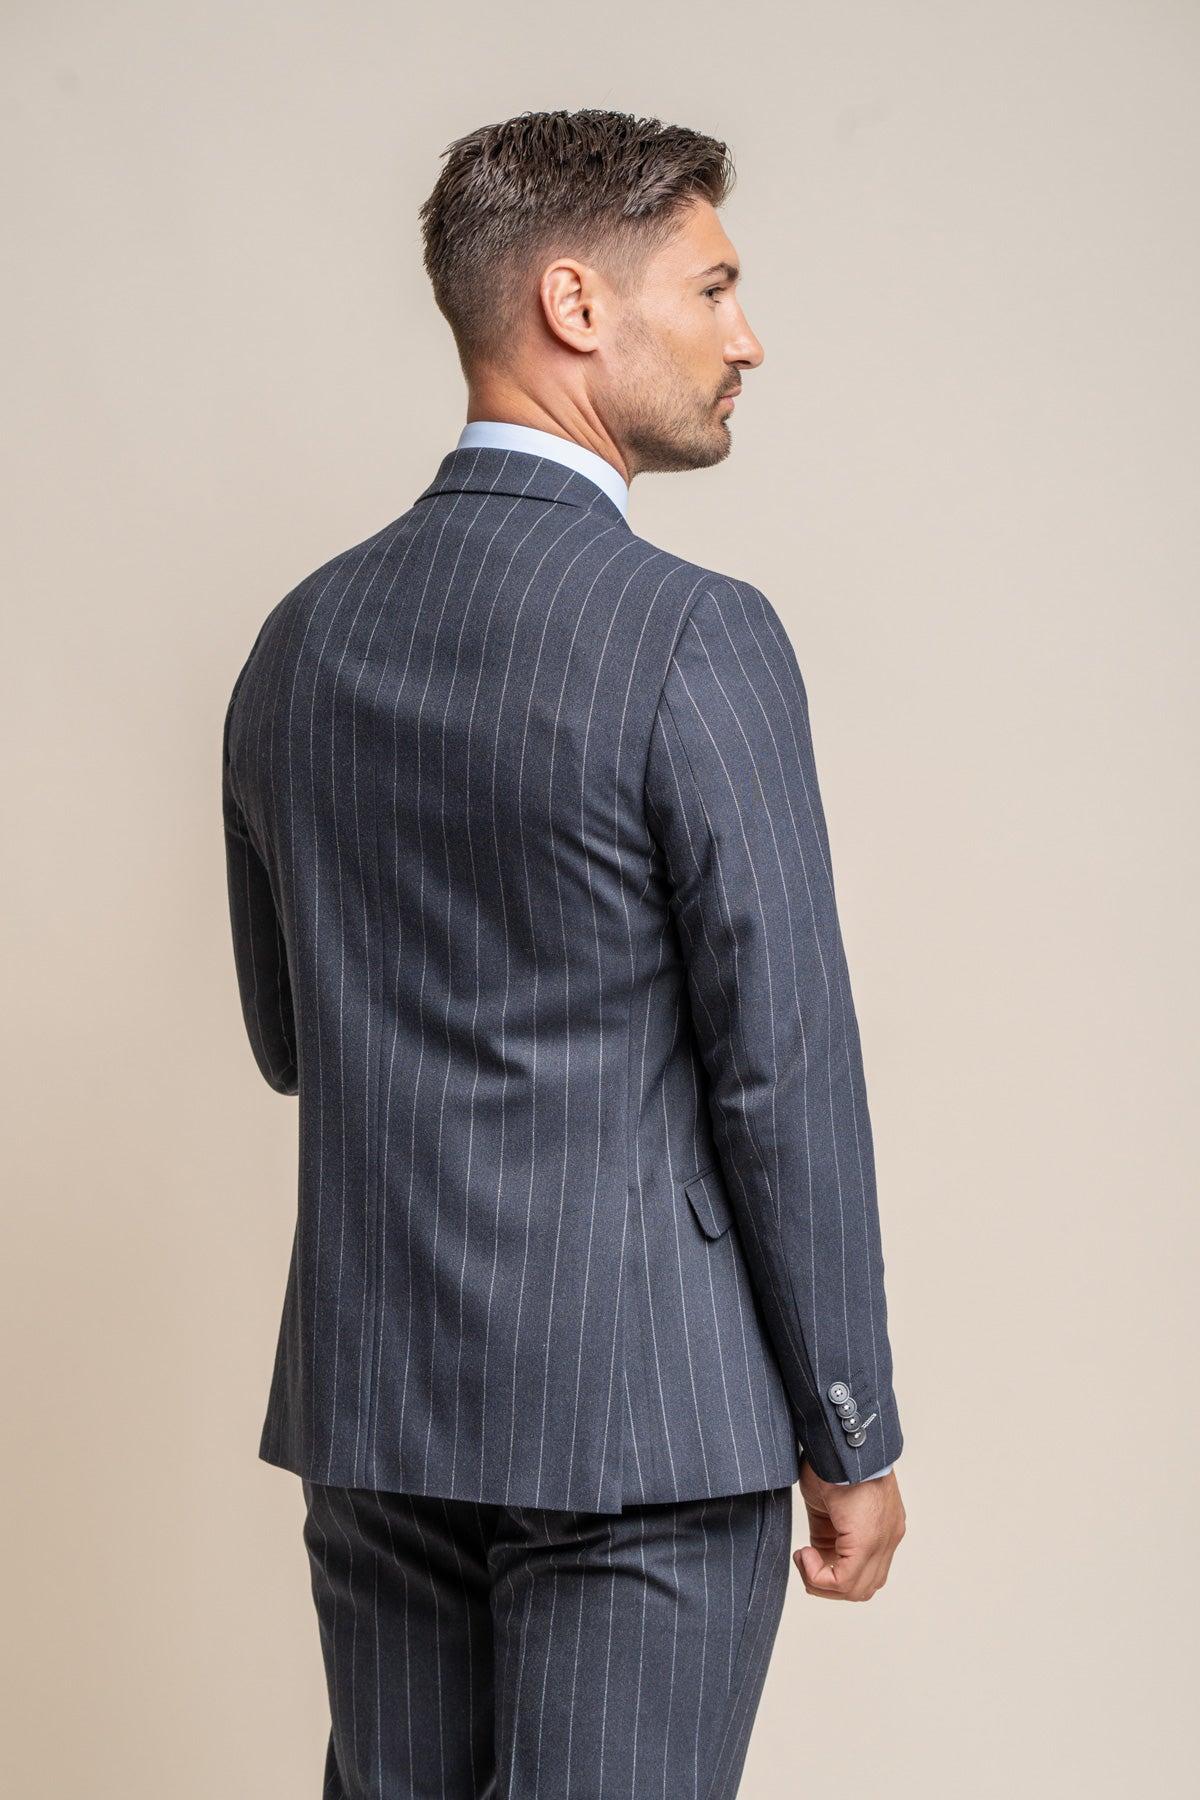 Invincible Navy Pinstripe Blazer - Blazers & Jackets - 34R - Swagger & Swoon